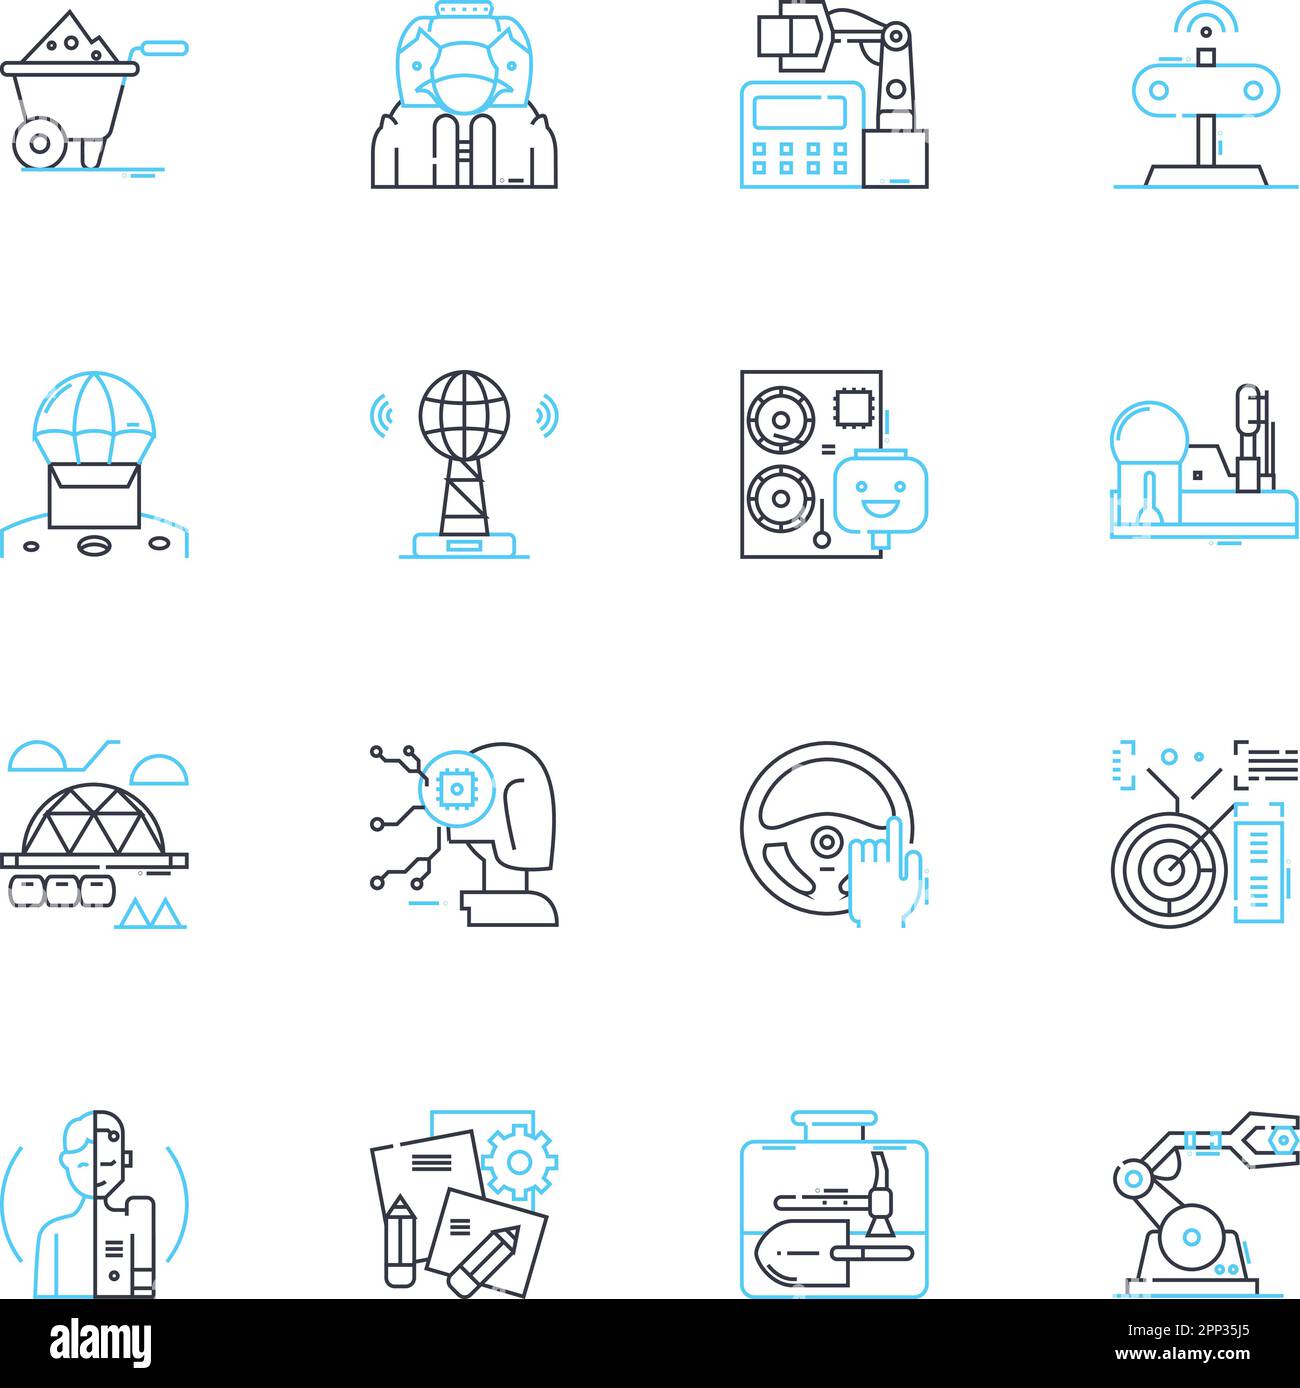 Architect linear icons set. Design, Blueprint, Structure, Blueprinting, Planning, Development, Renovation line vector and concept signs. Building Stock Vector